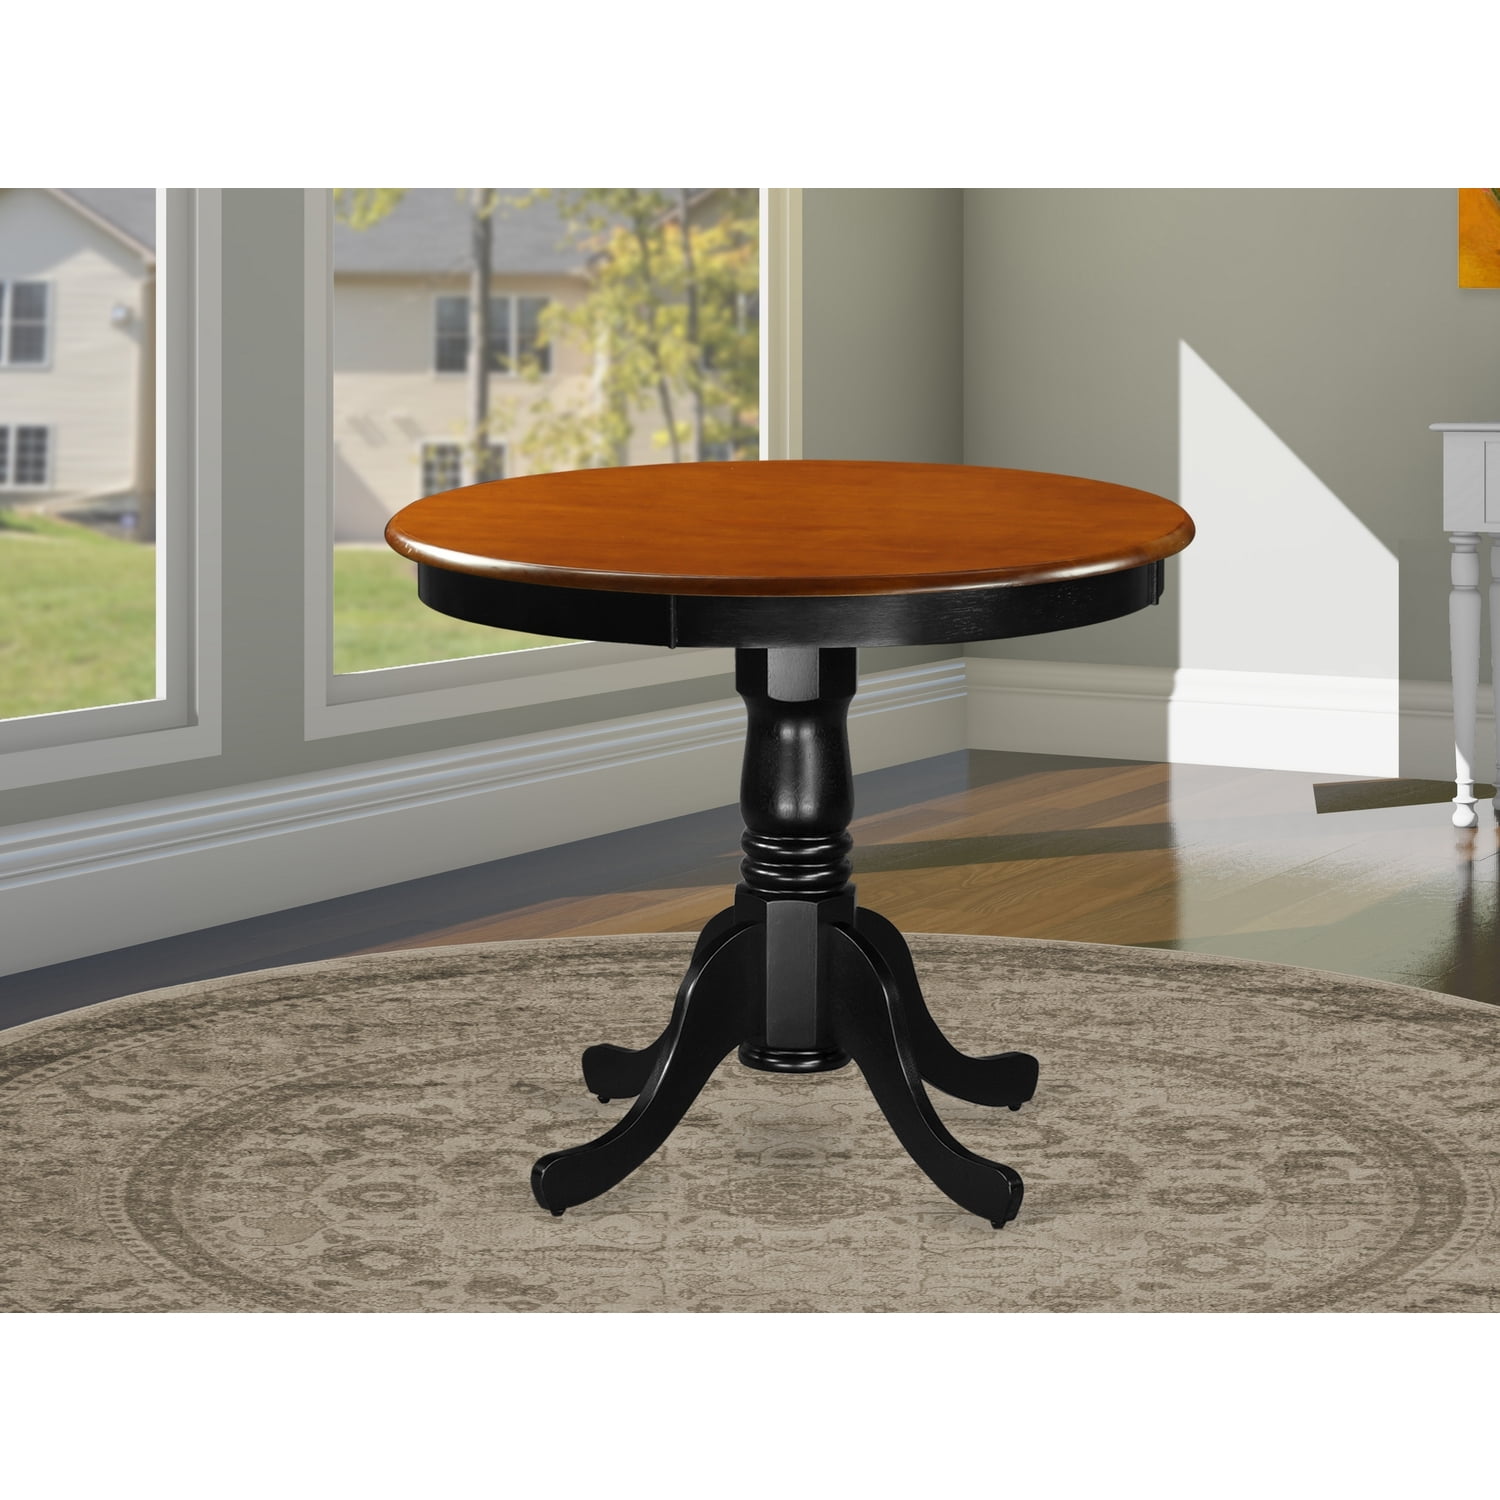 Antique 36" small round single pedestal table in cherry black solid wood new 